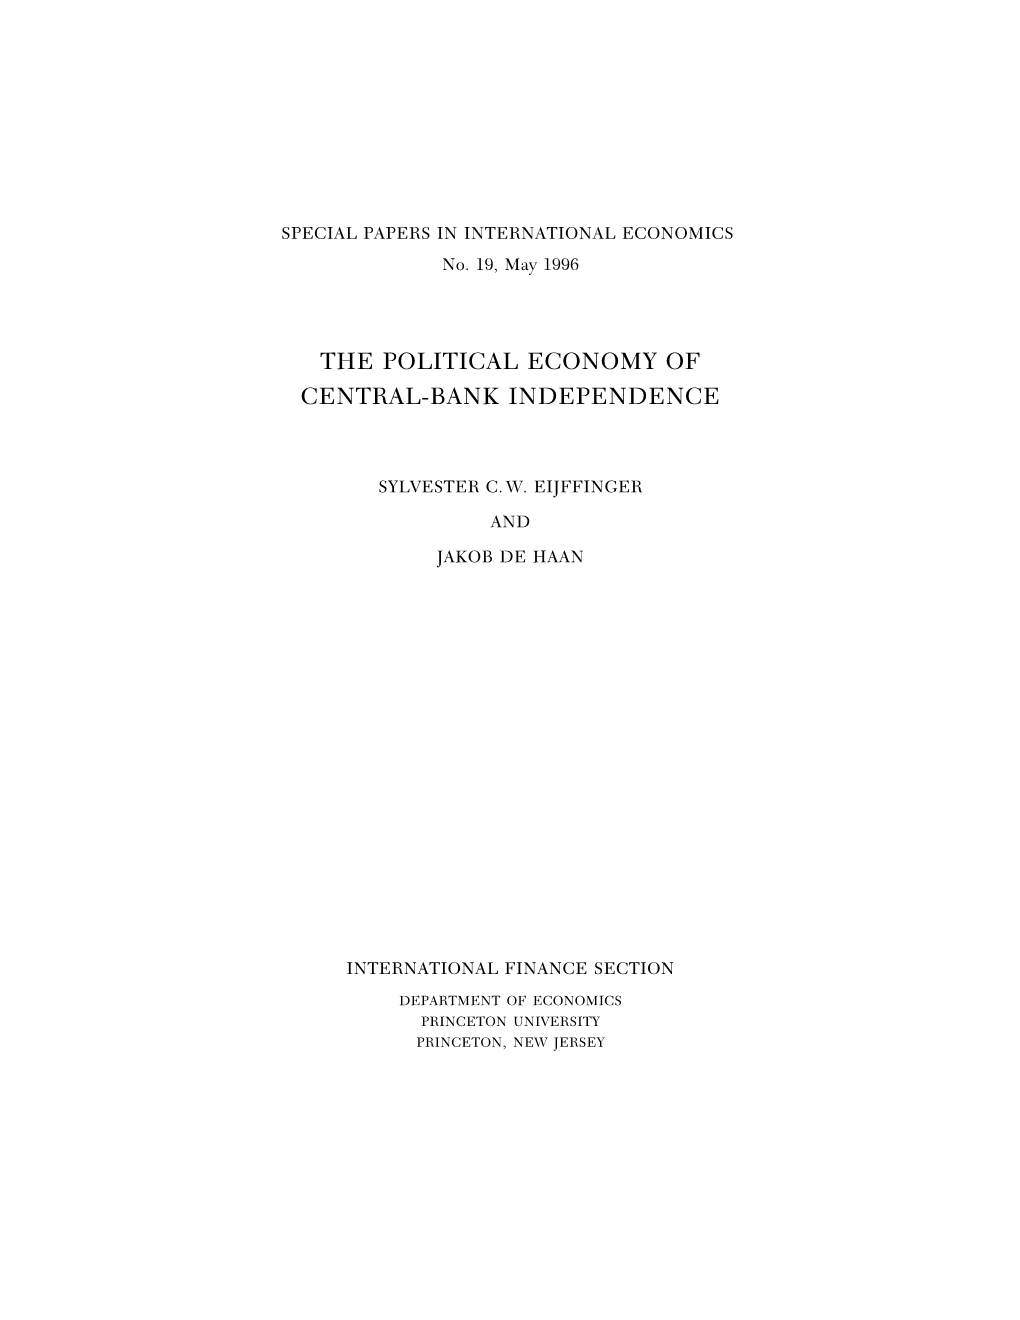 The Political Economy of Central-Bank Independence